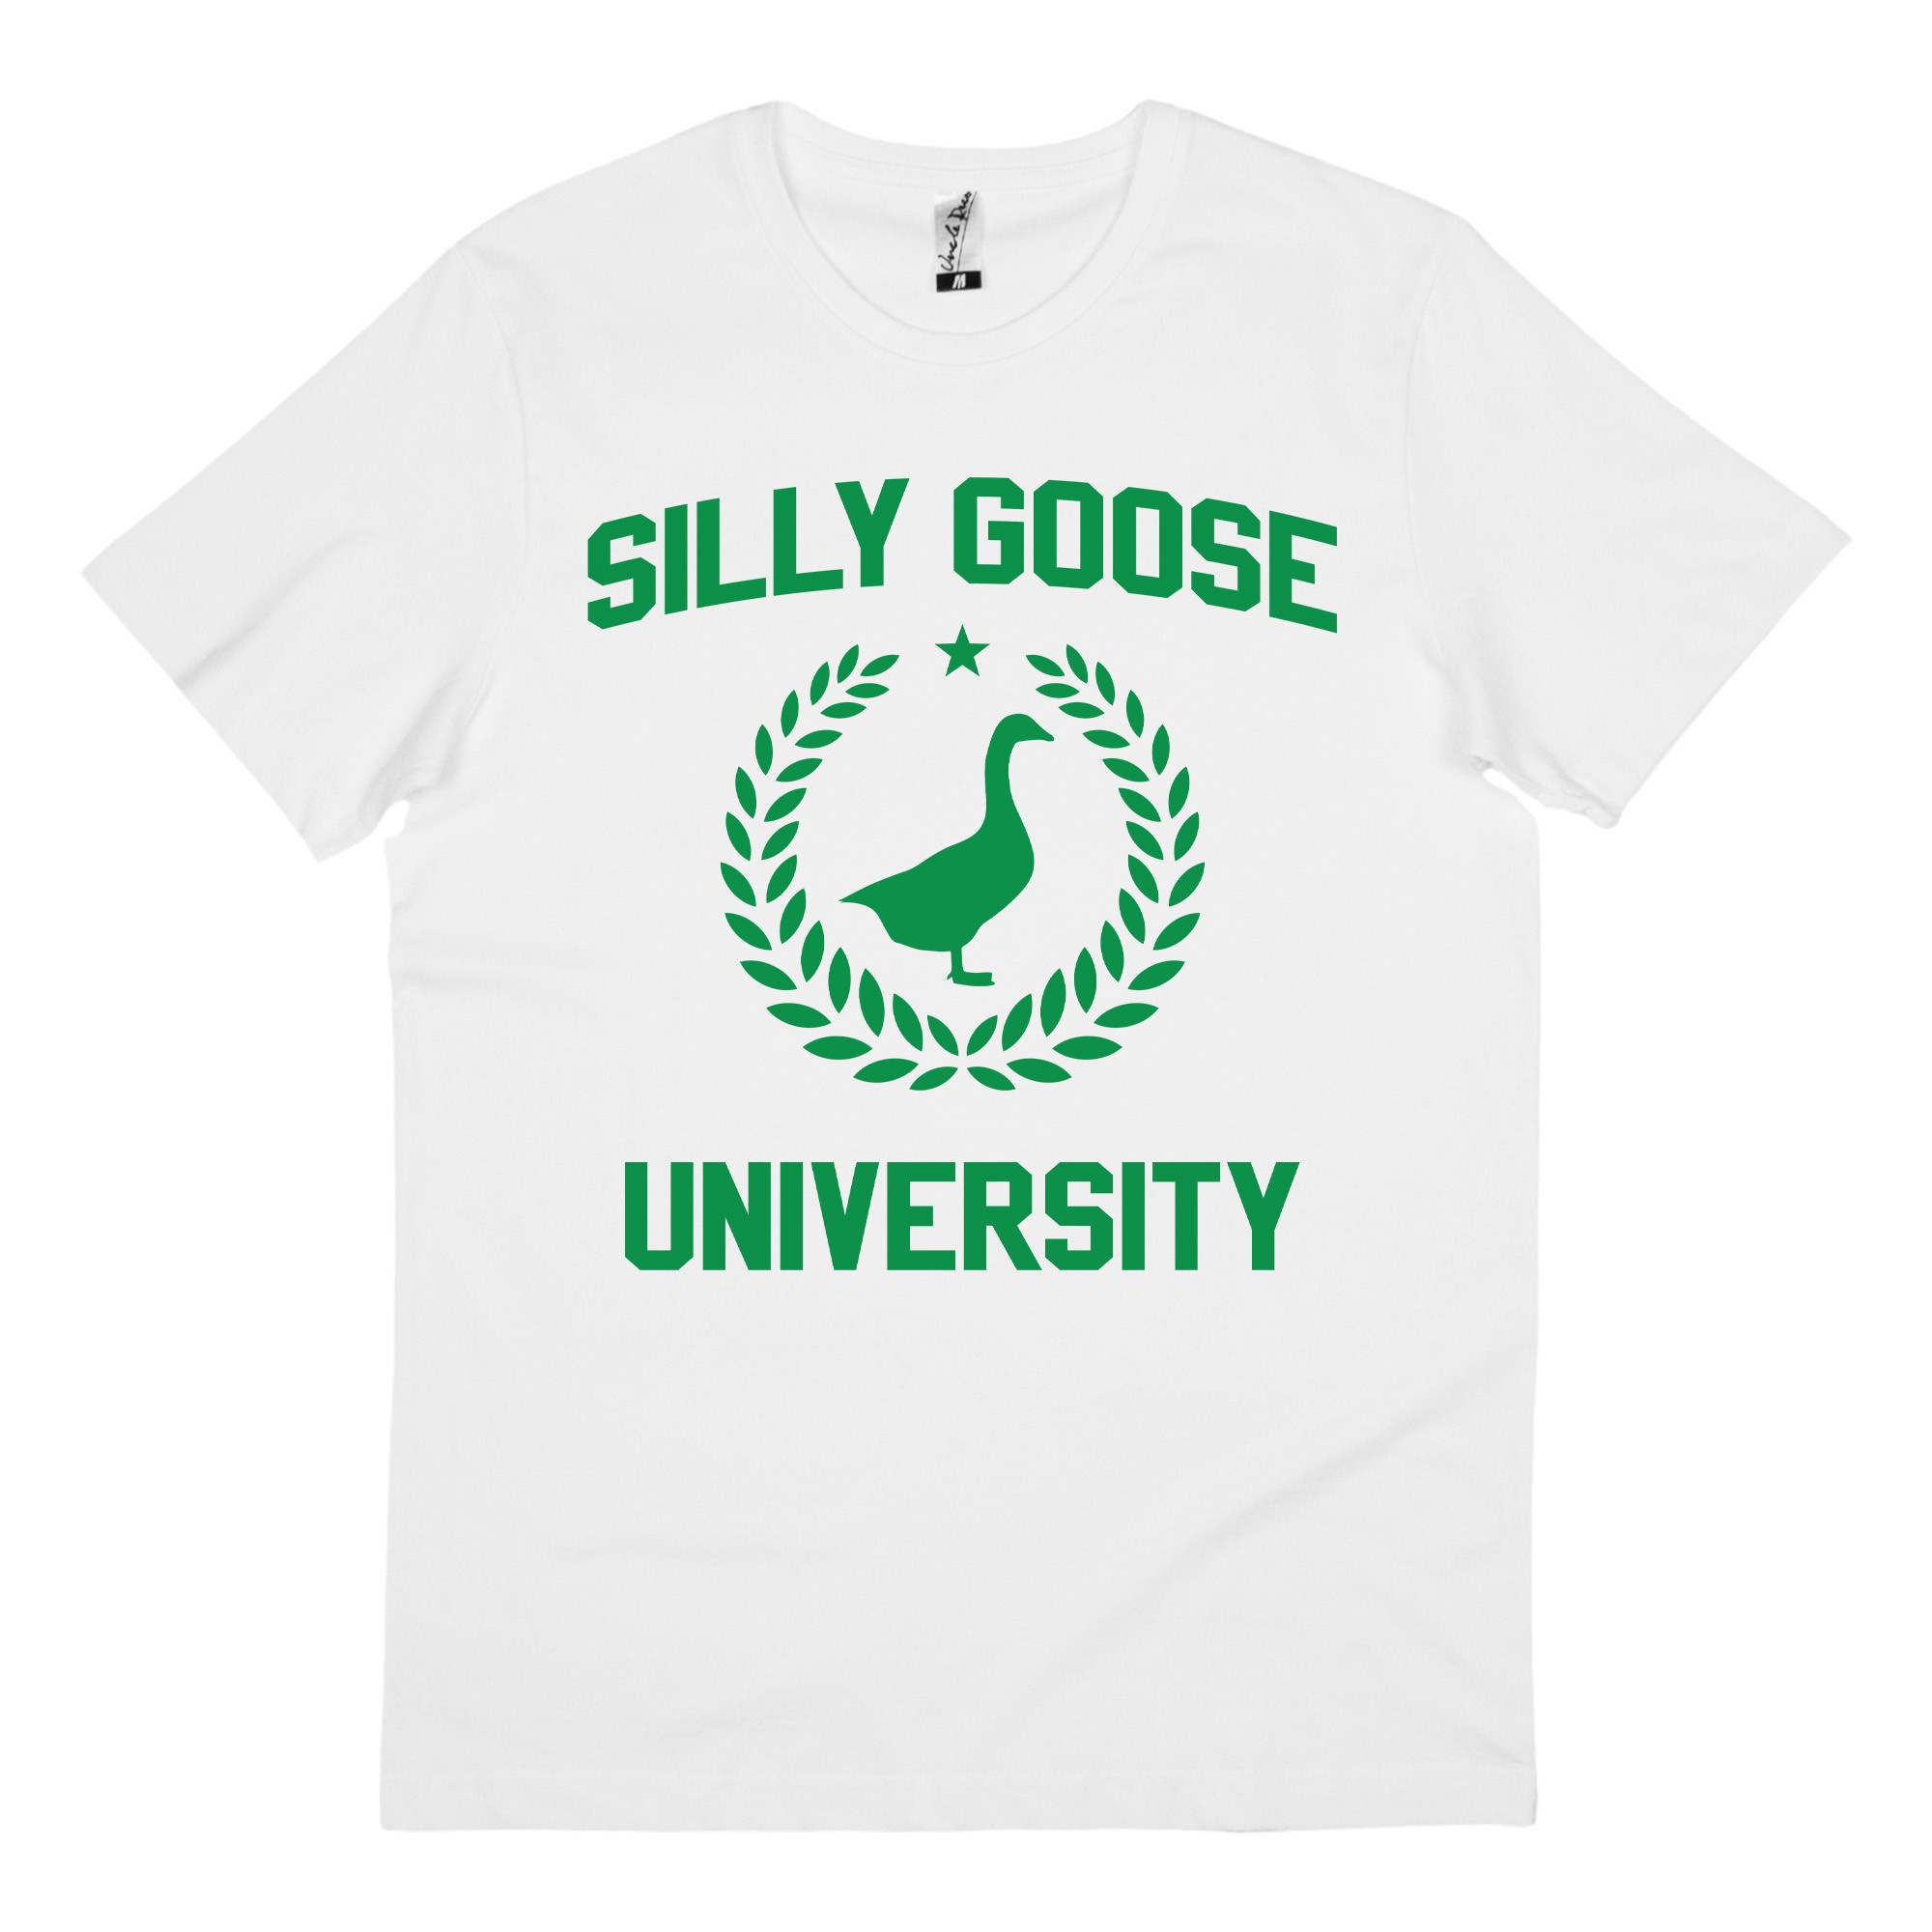 SILLY GOOSE WHITE TEE, Silly Goose White T-Shirt